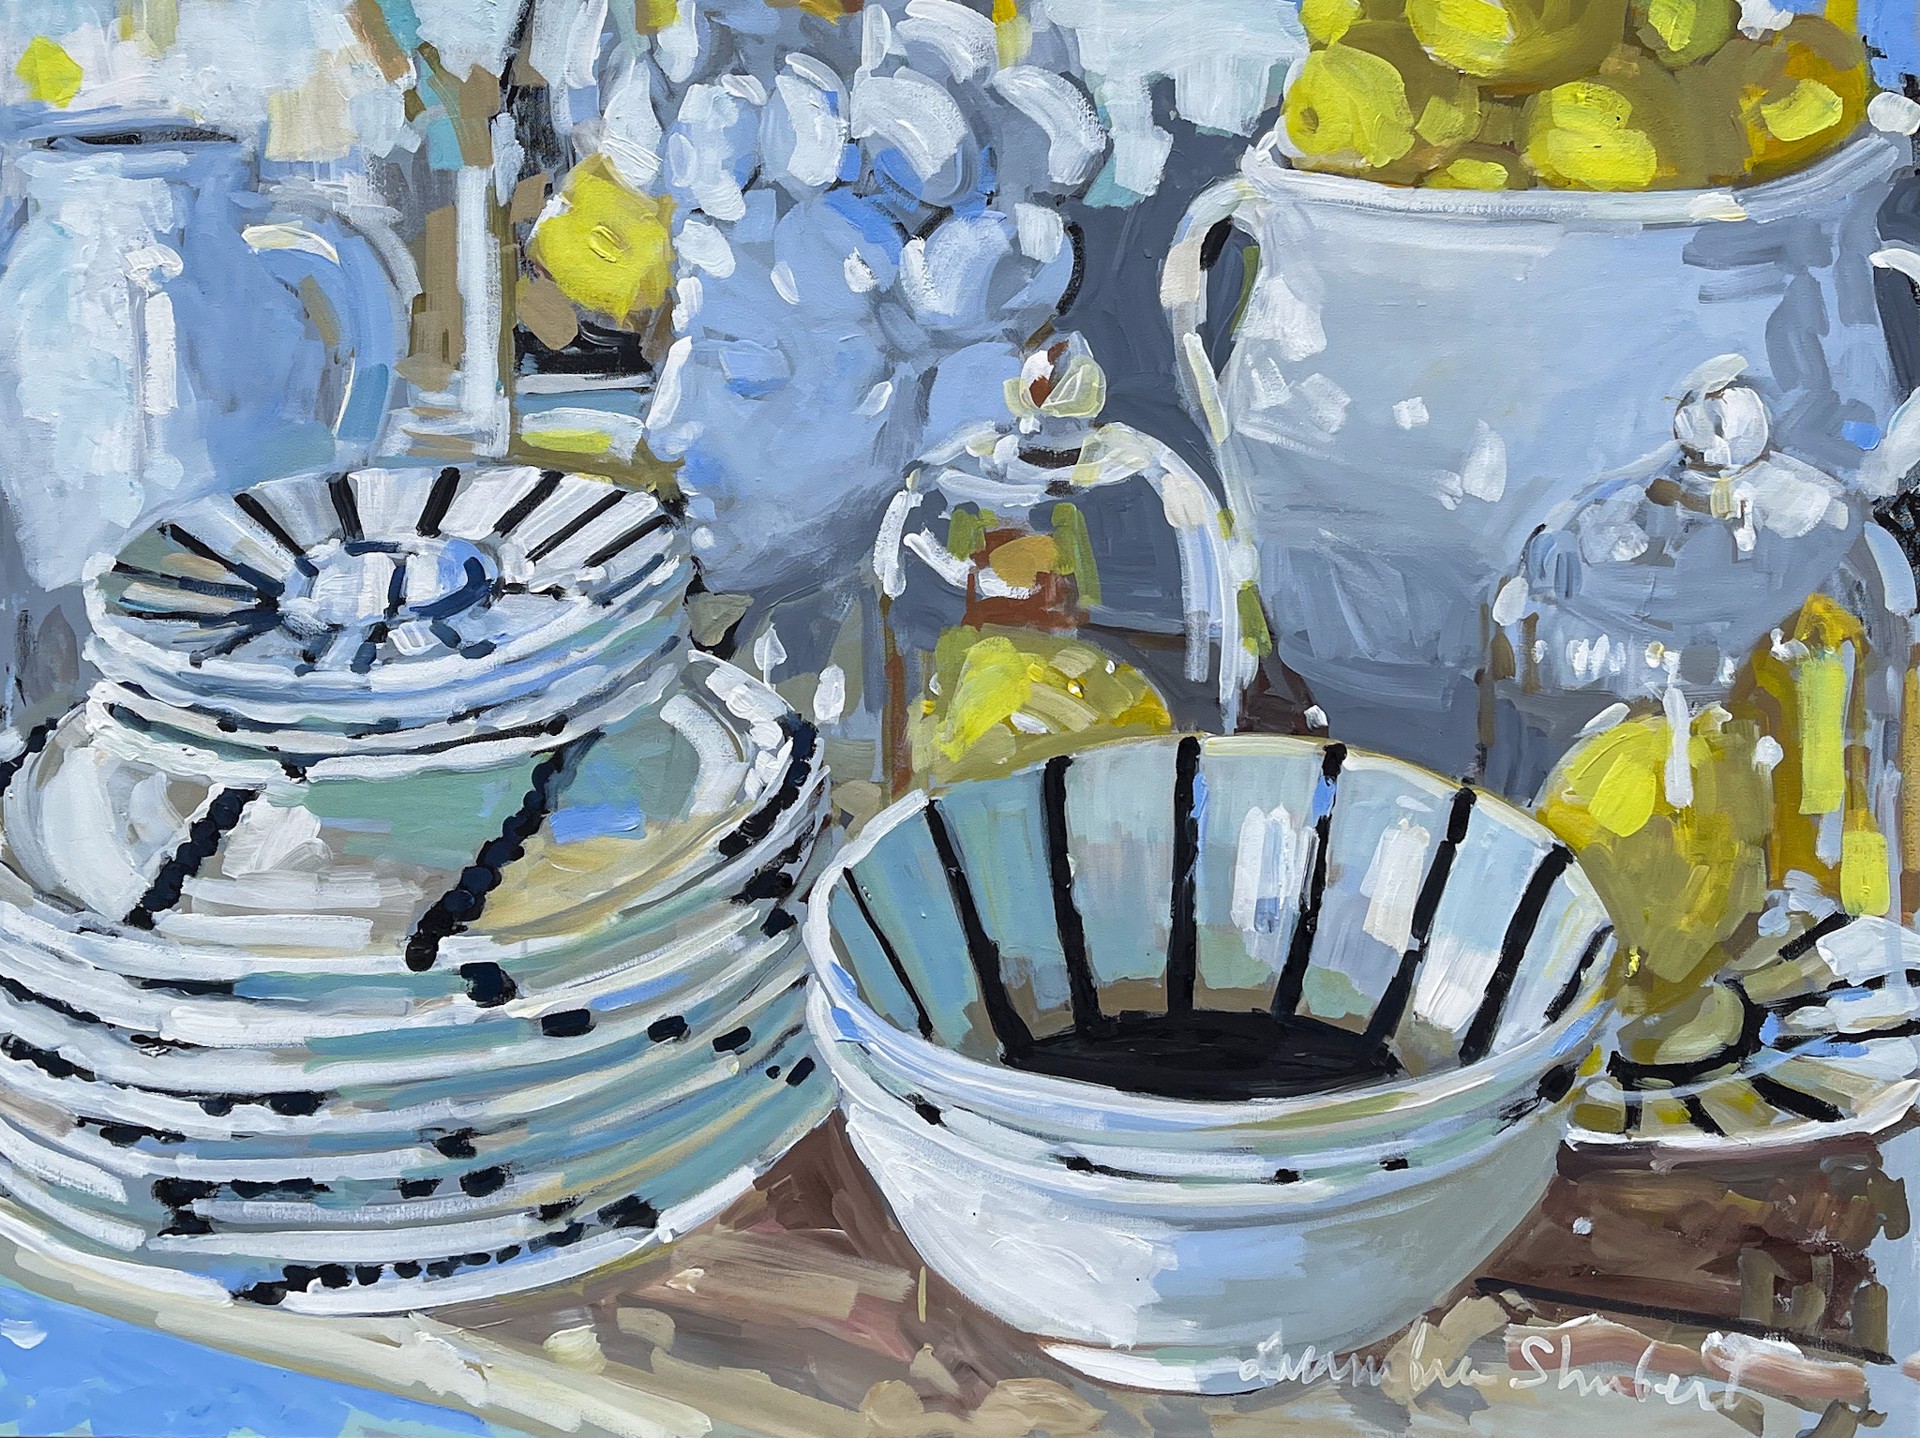 Black and White China With Lemons by Laura Lacambra Shubert